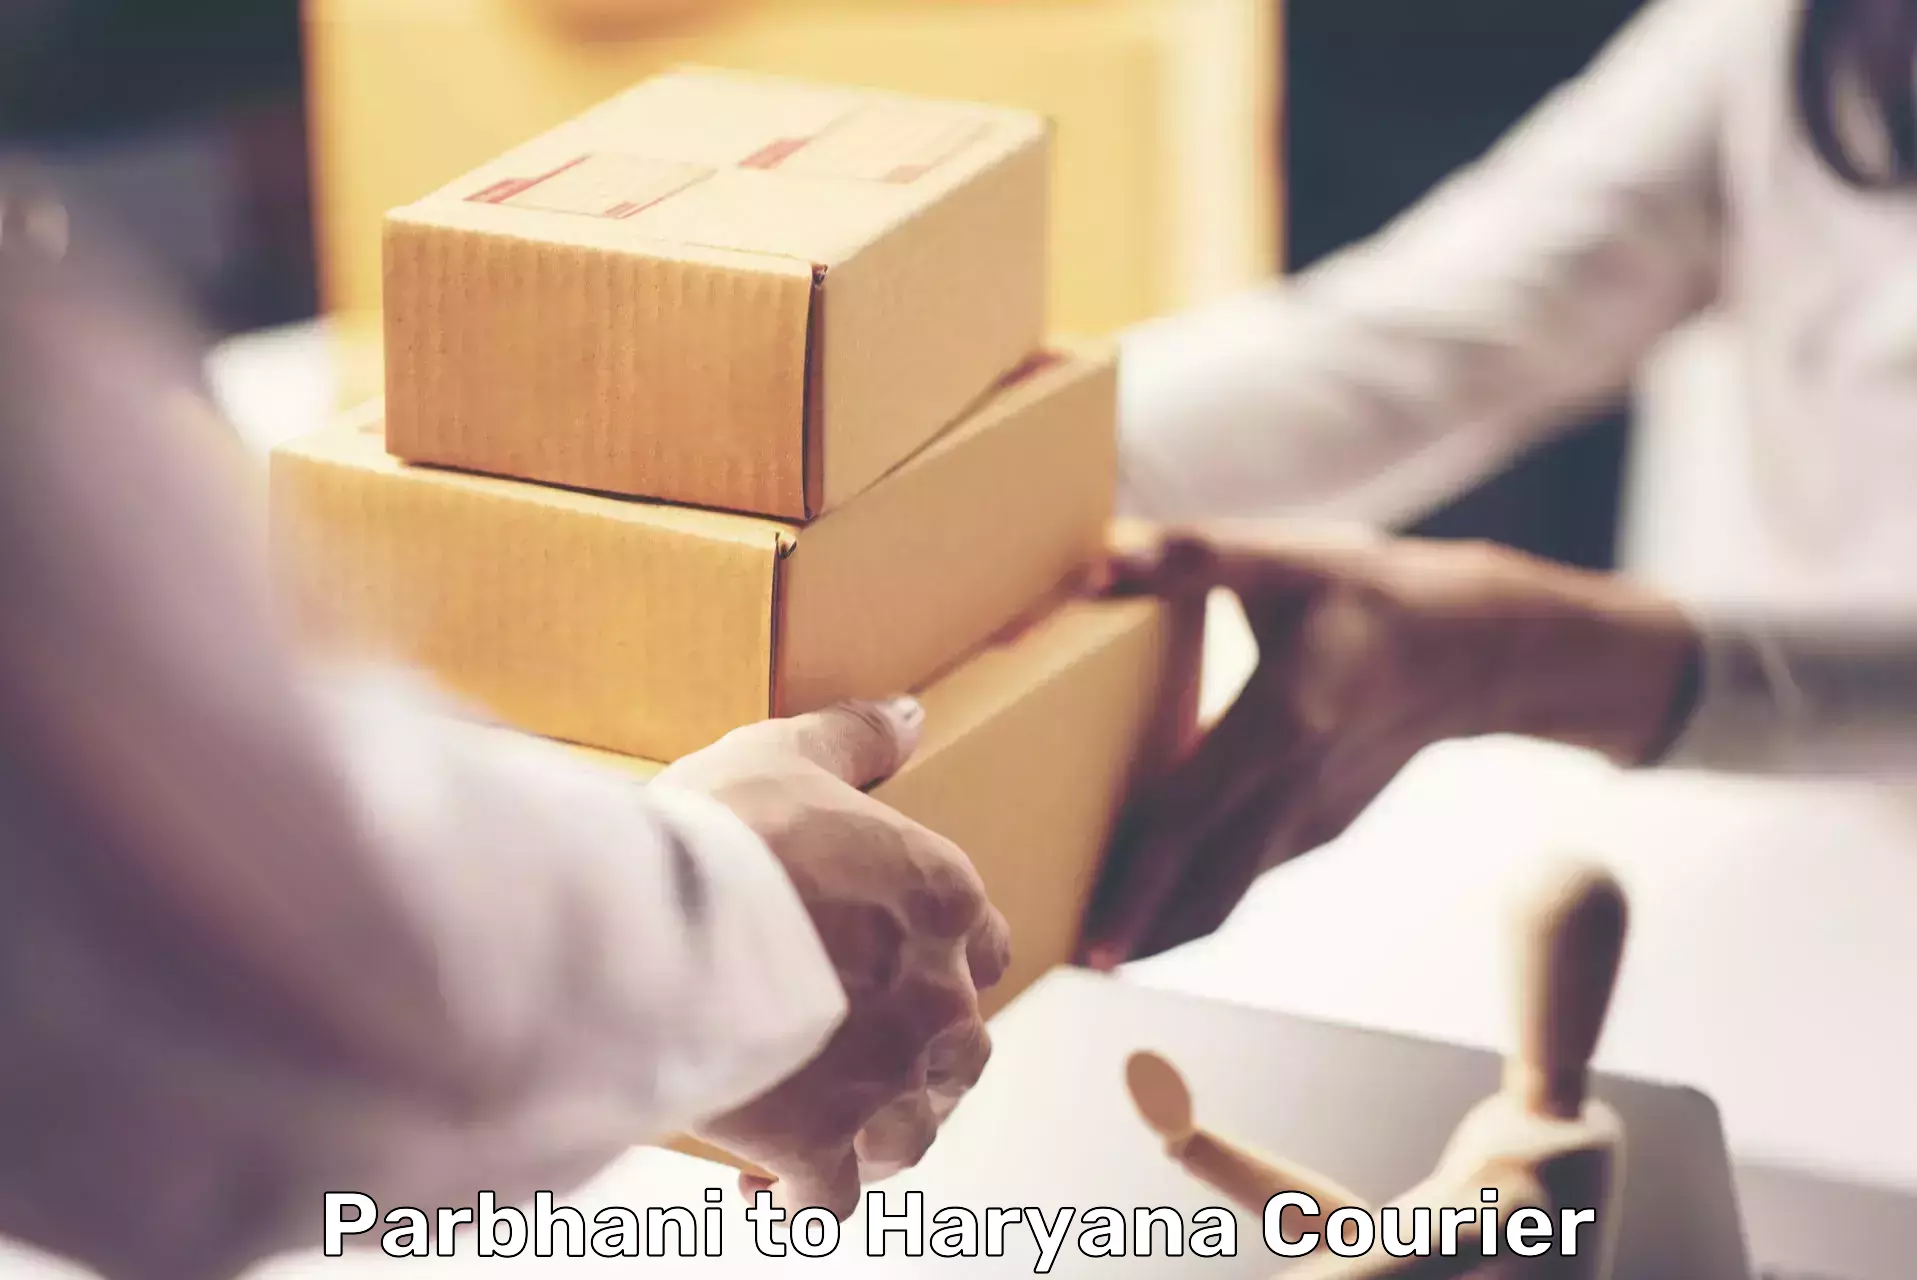 Package delivery network Parbhani to Haryana